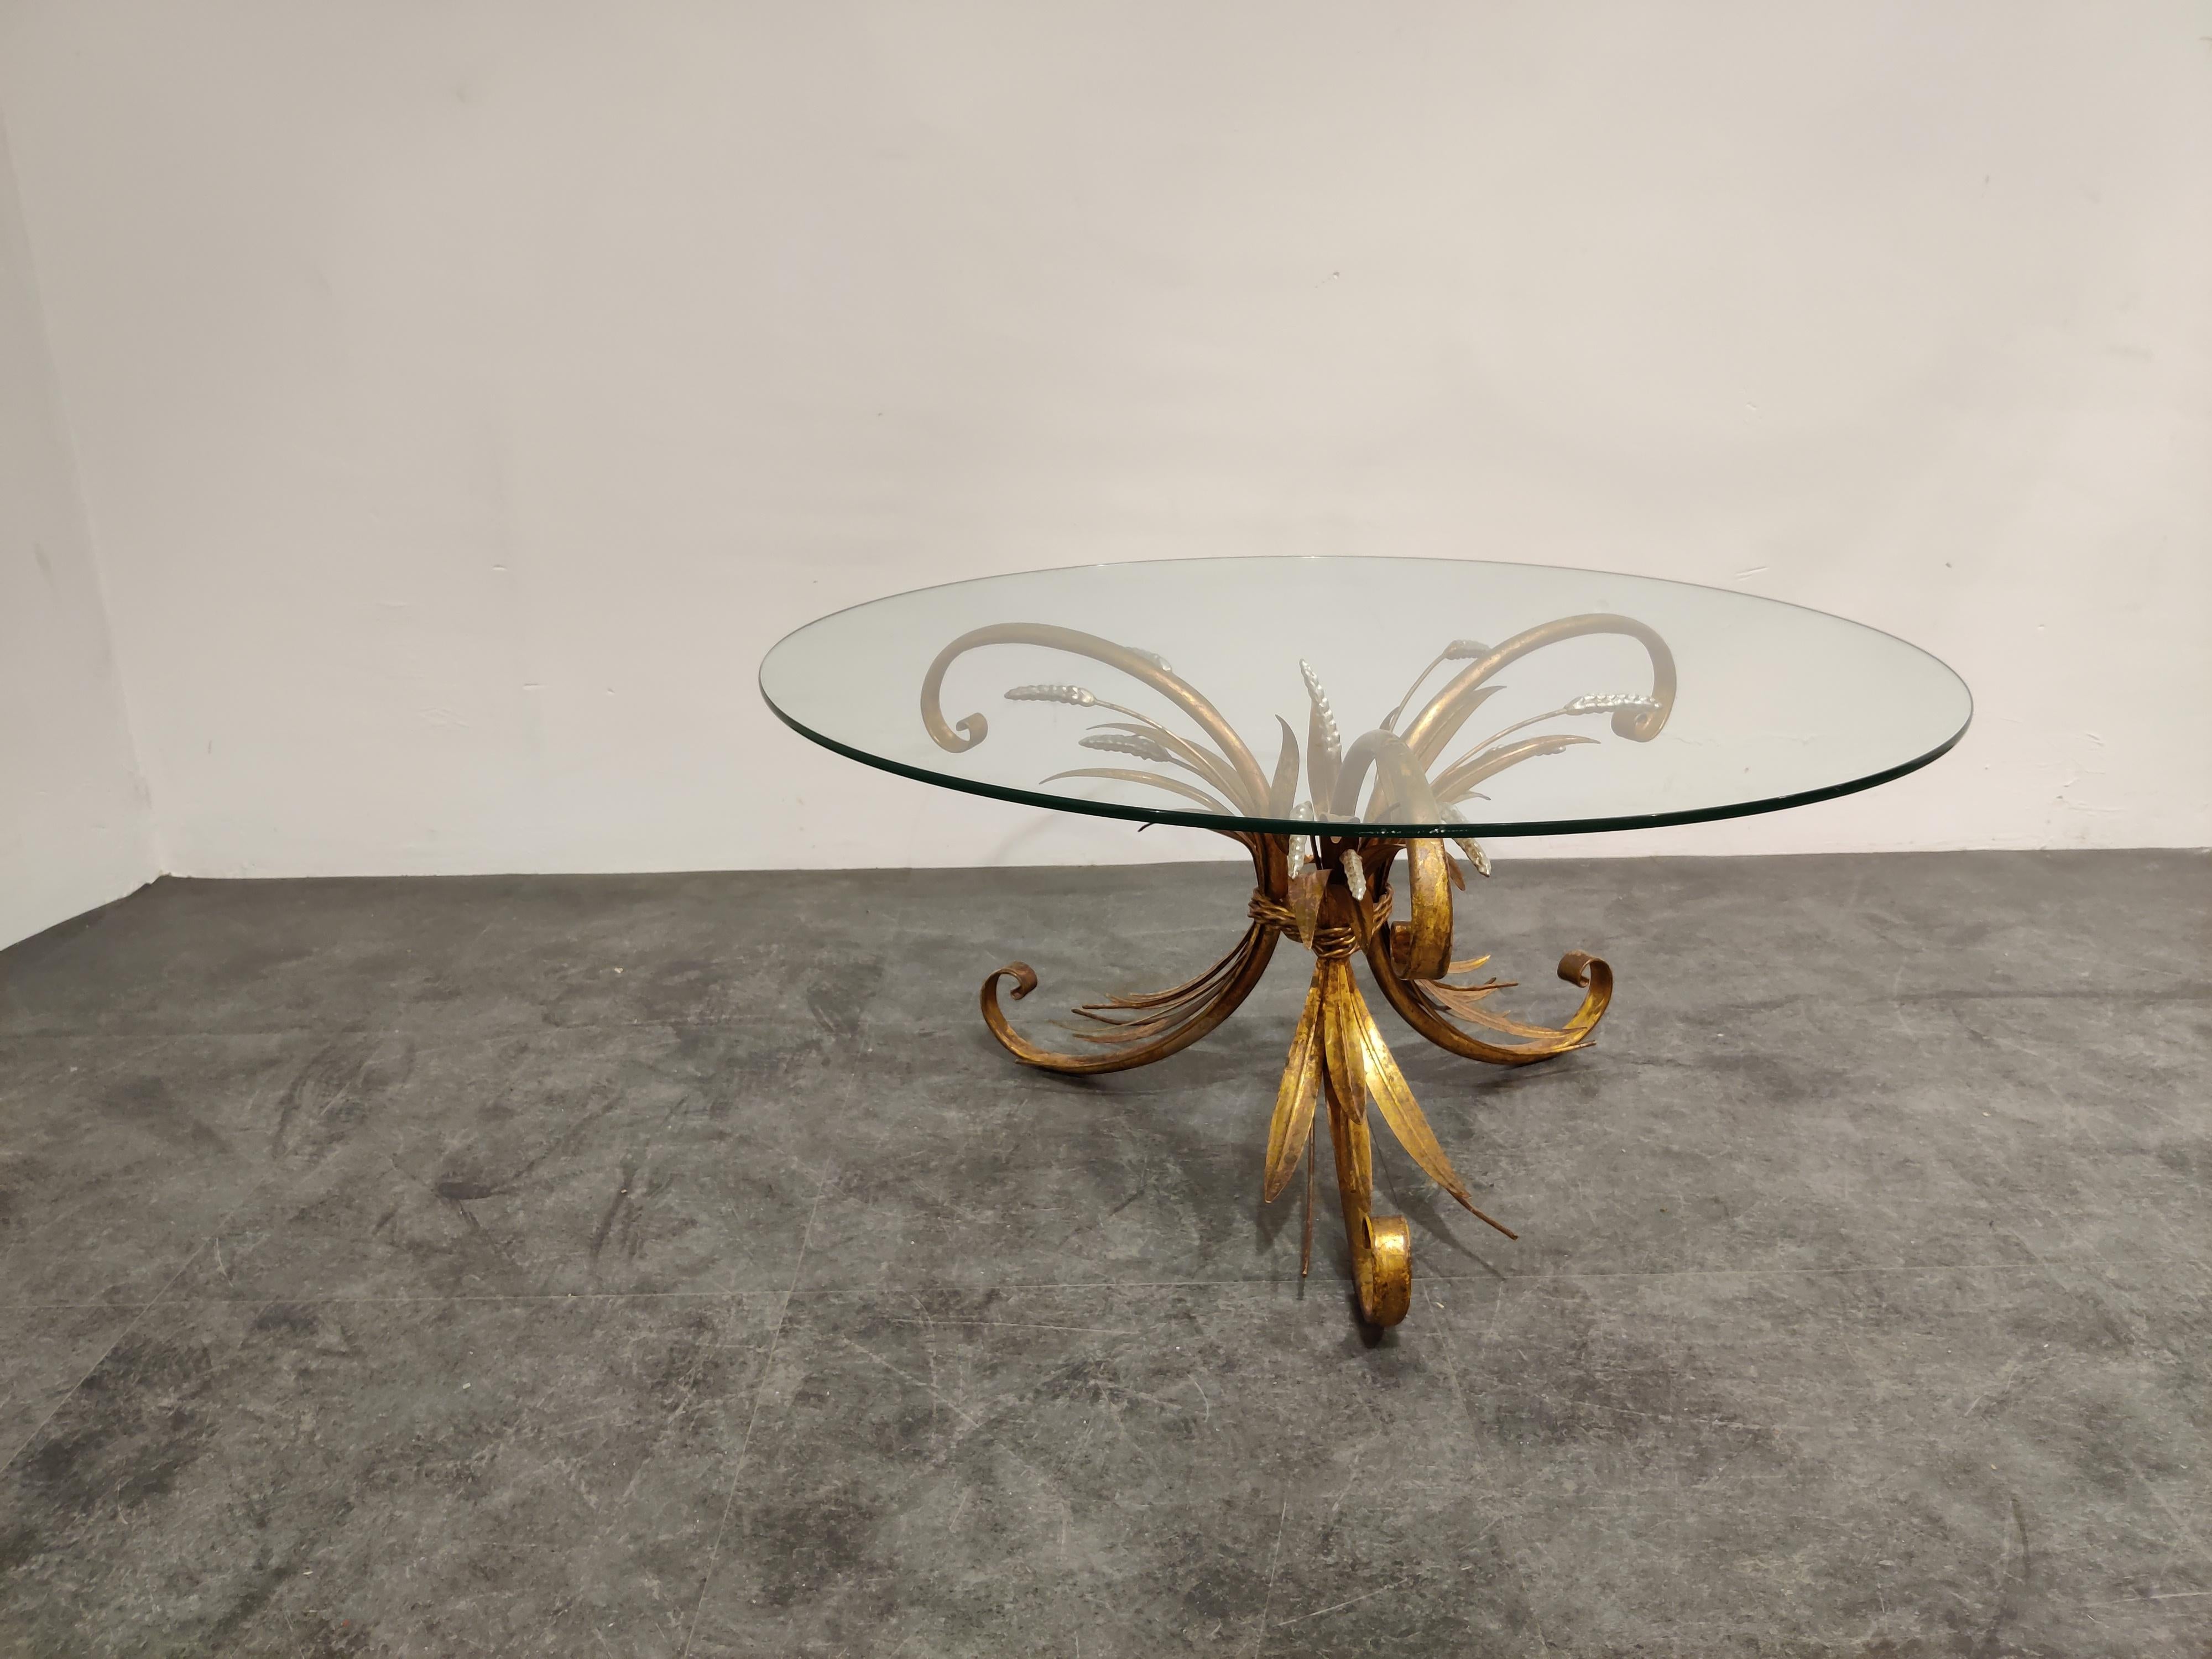 Vintage tripod Coco Chanel coffee table.

The table is named after the famous fashion queen Gabrielle Bonheur Chanel.

Made of gilt metal with a round glass top.

The table is in very good vintage condition beautiful patina.

1960s -